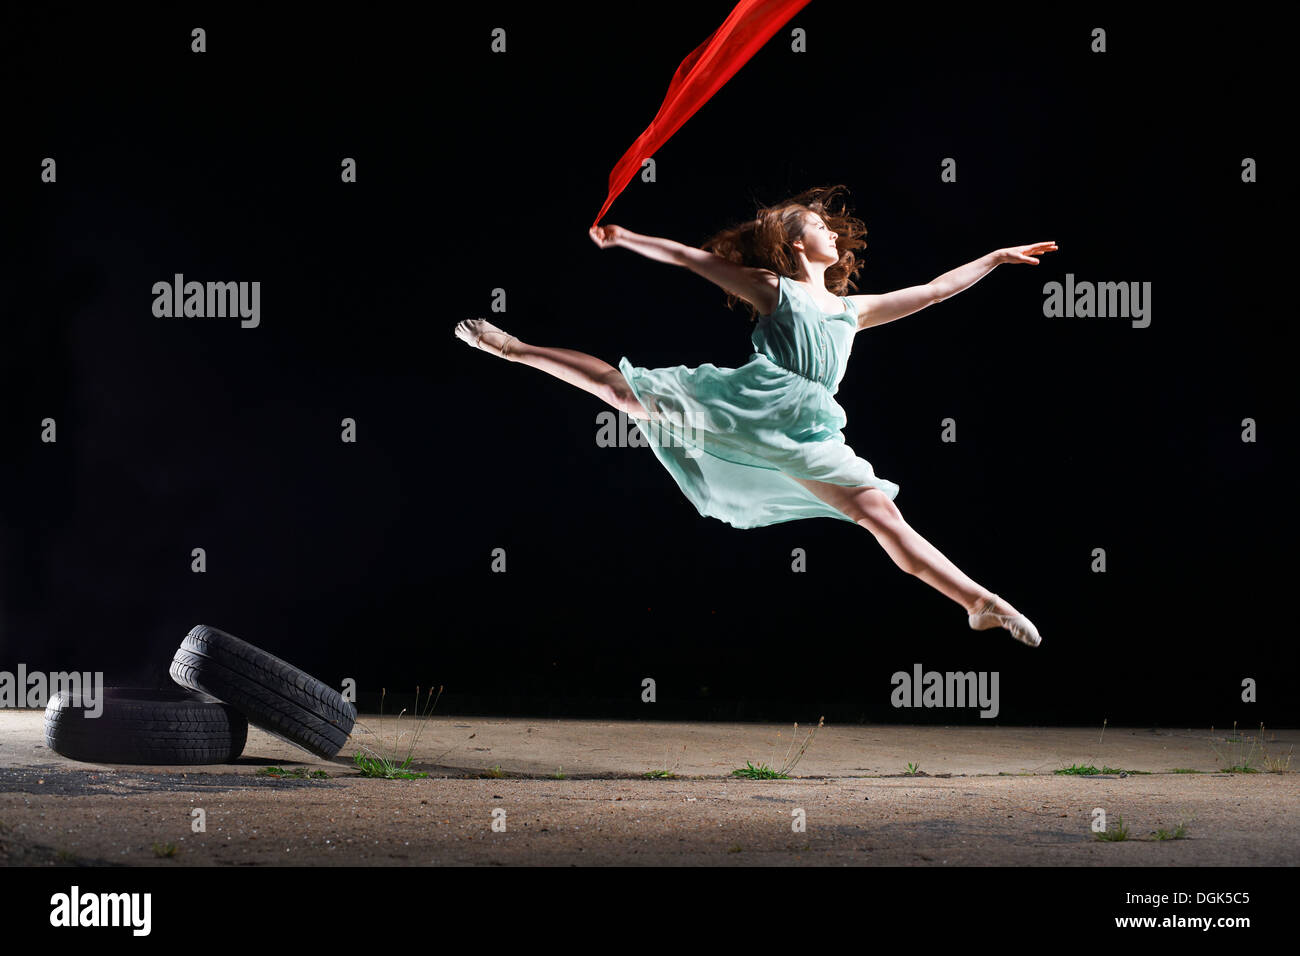 Ballet dancer leaping mid air holding red scarf Stock Photo